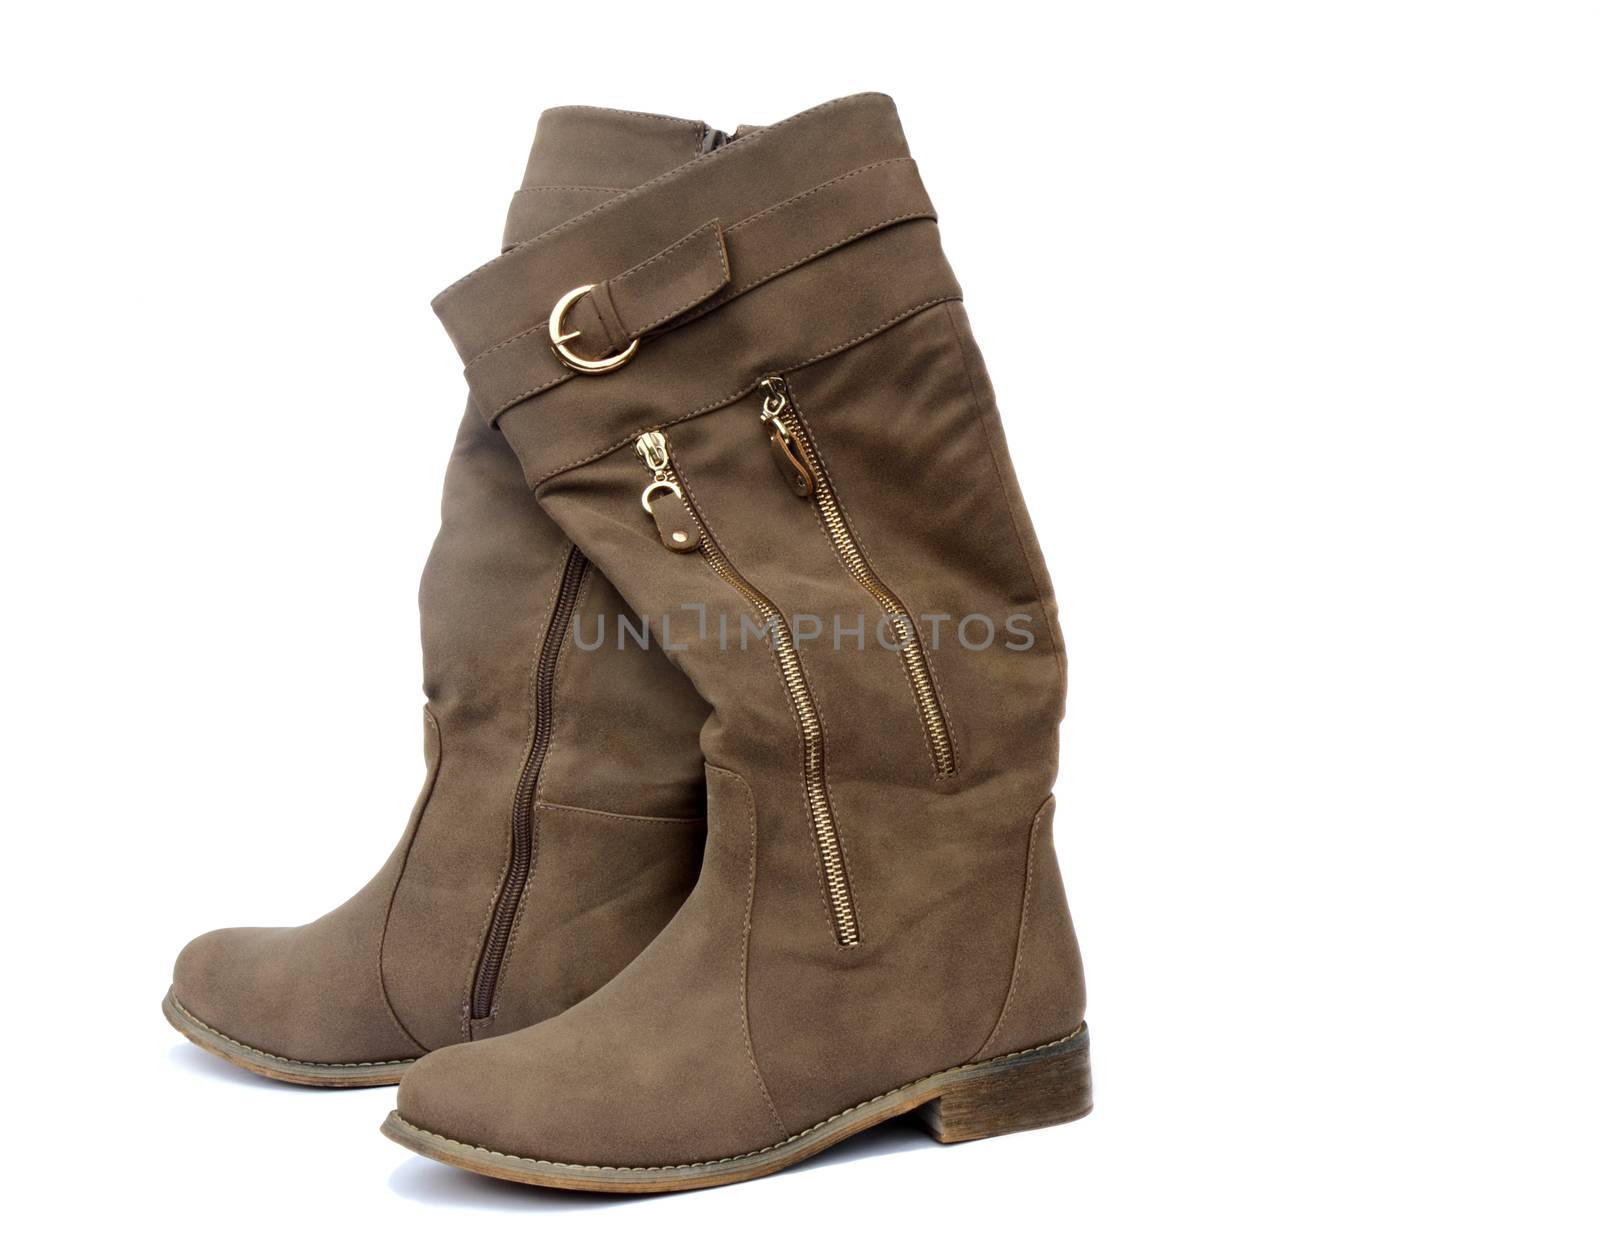 Women's boots made of soft skin on a white background. by georgina198